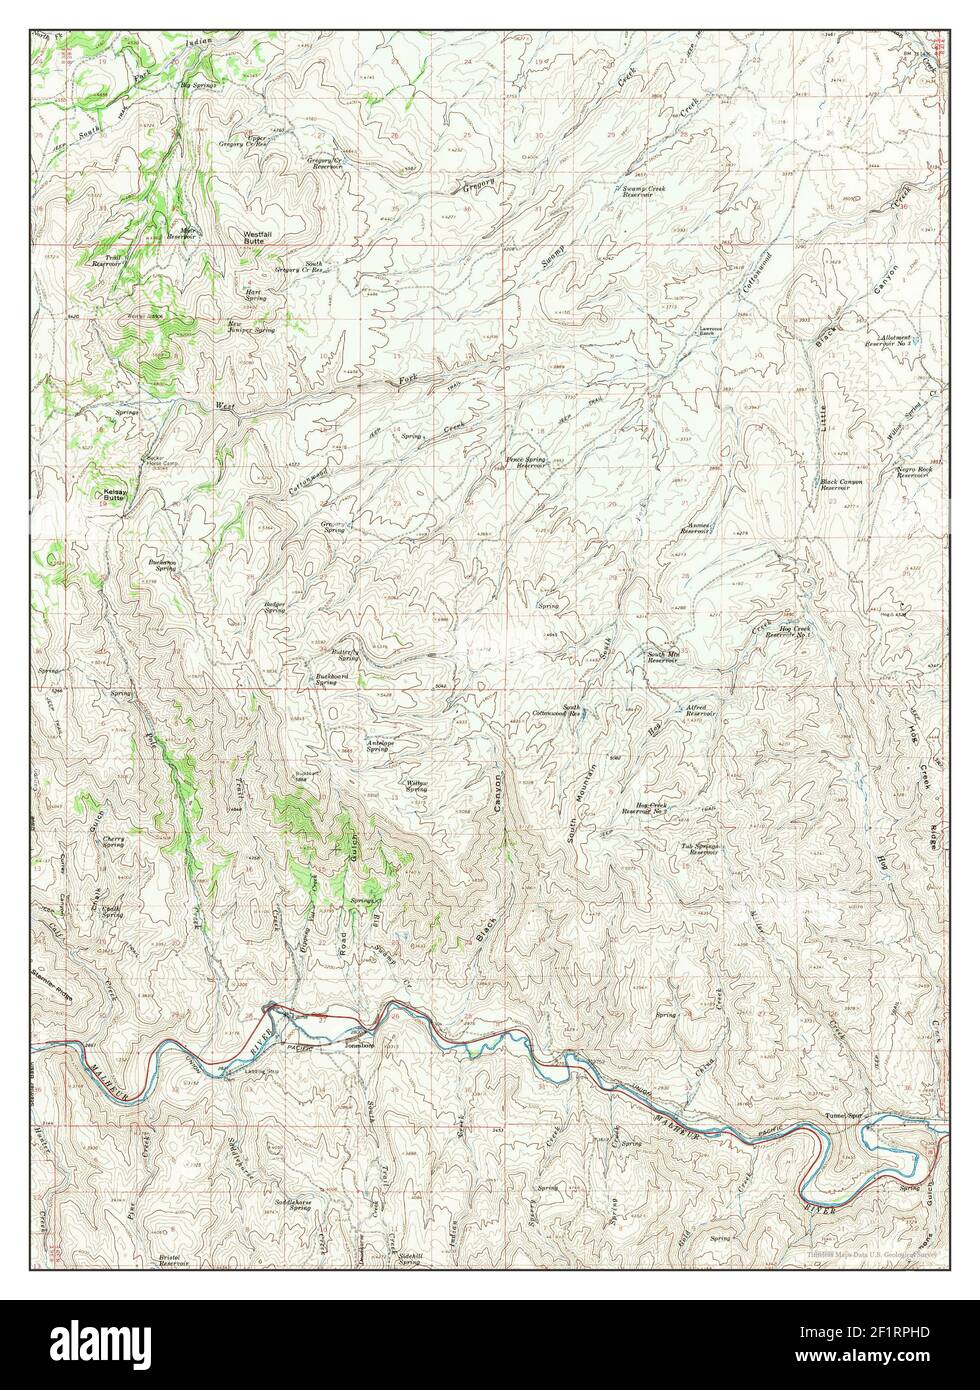 Westfall Butte, Oregon, map 1966, 1:62500, United States of America by Timeless Maps, data U.S. Geological Survey Stock Photo